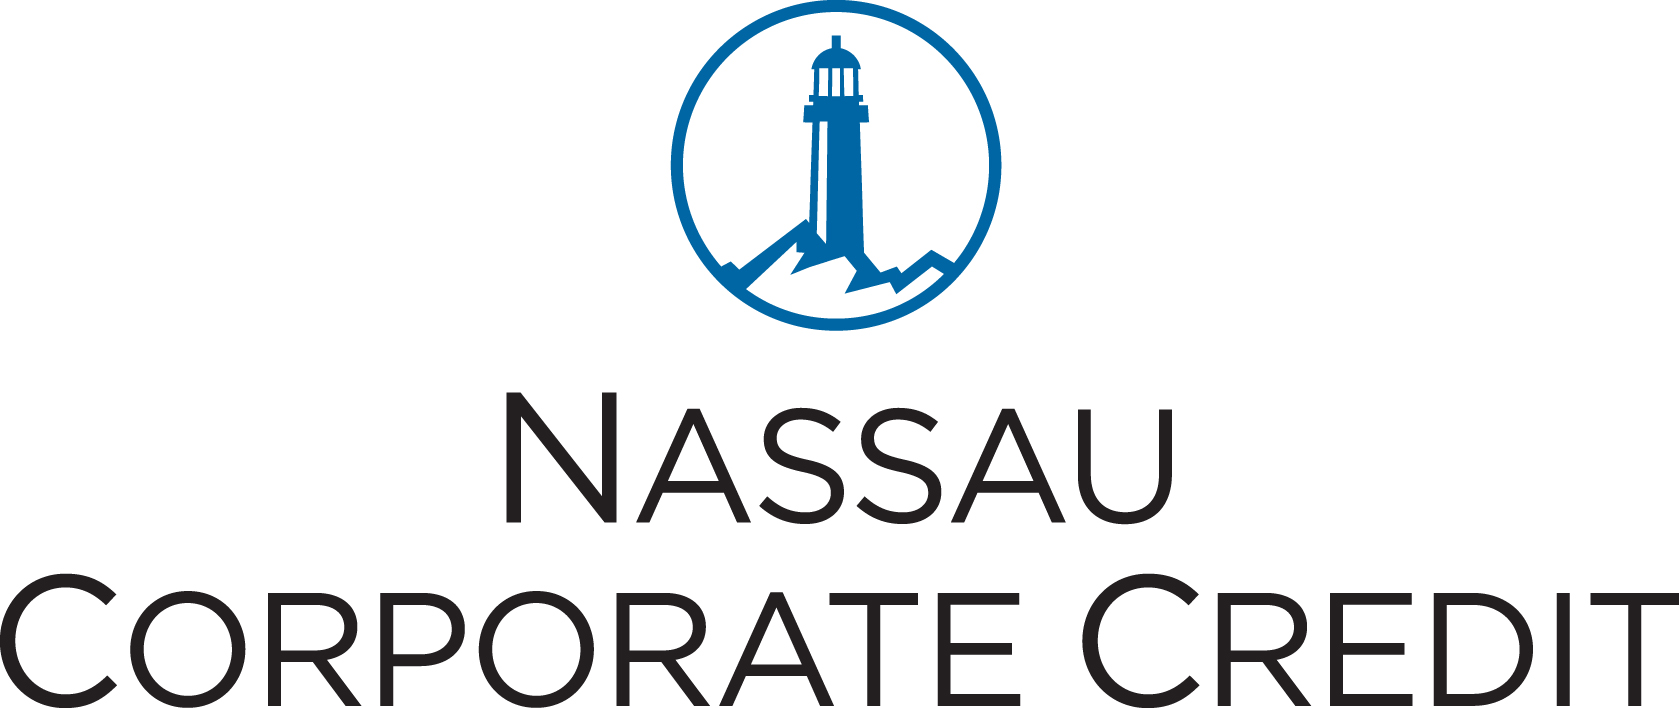 Nassau Corporate Credit wins “Best New US CLO” at 2020 Creditflux Manager Awards